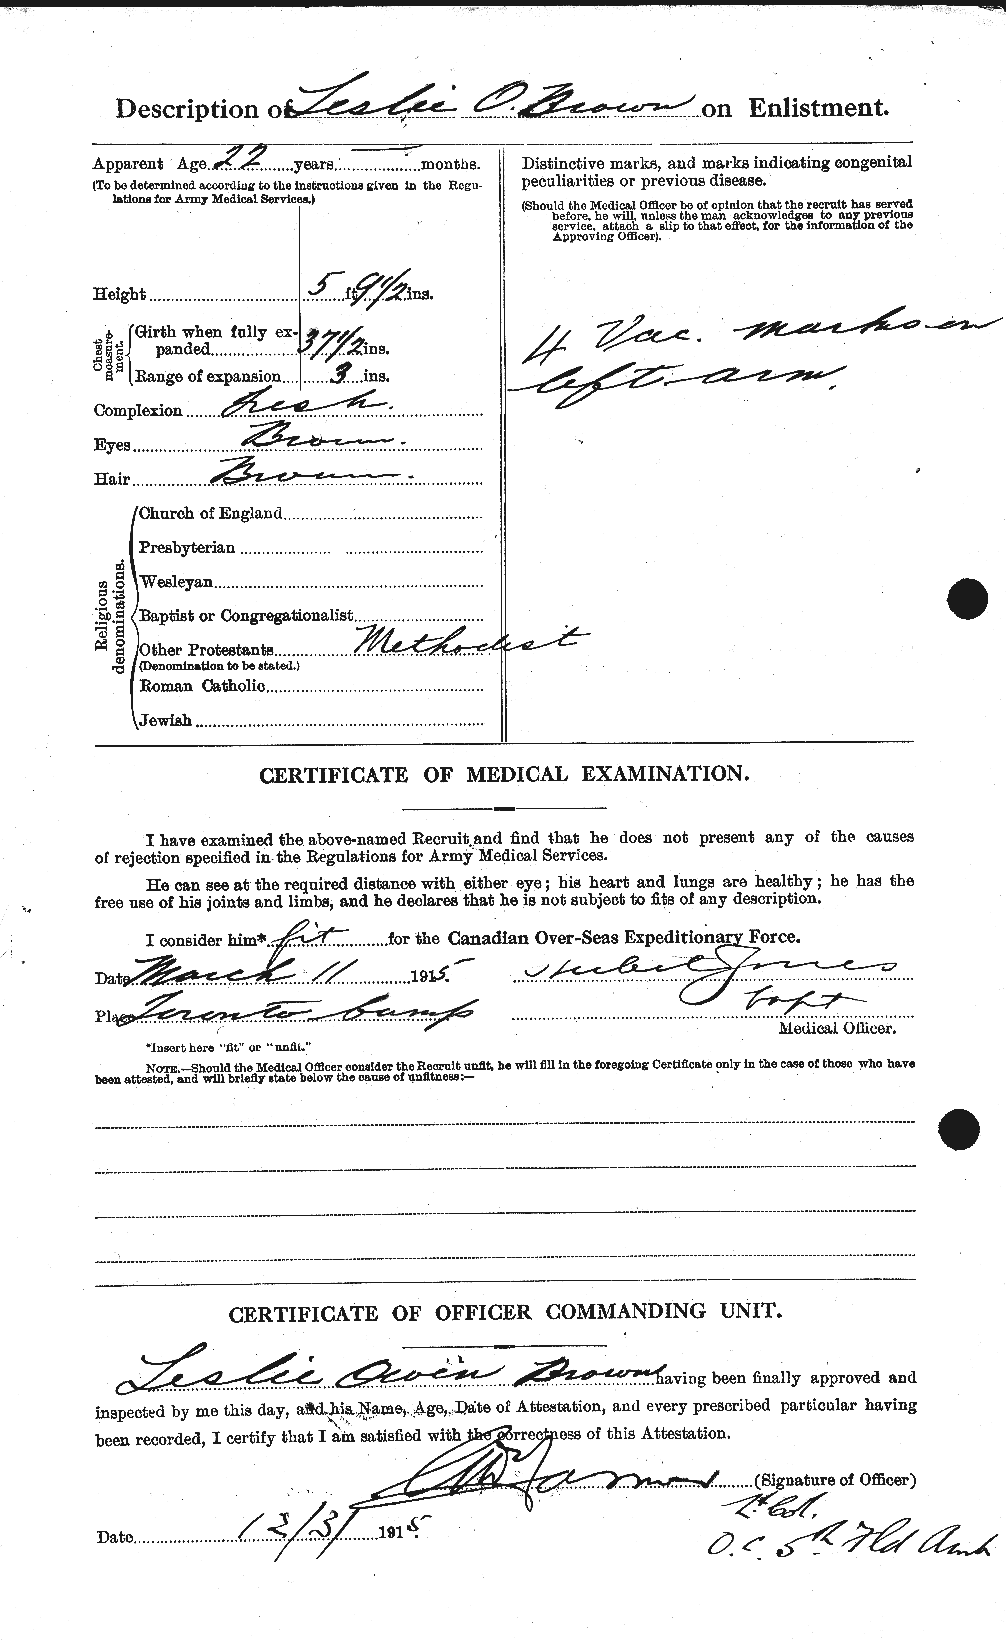 Personnel Records of the First World War - CEF 266310b